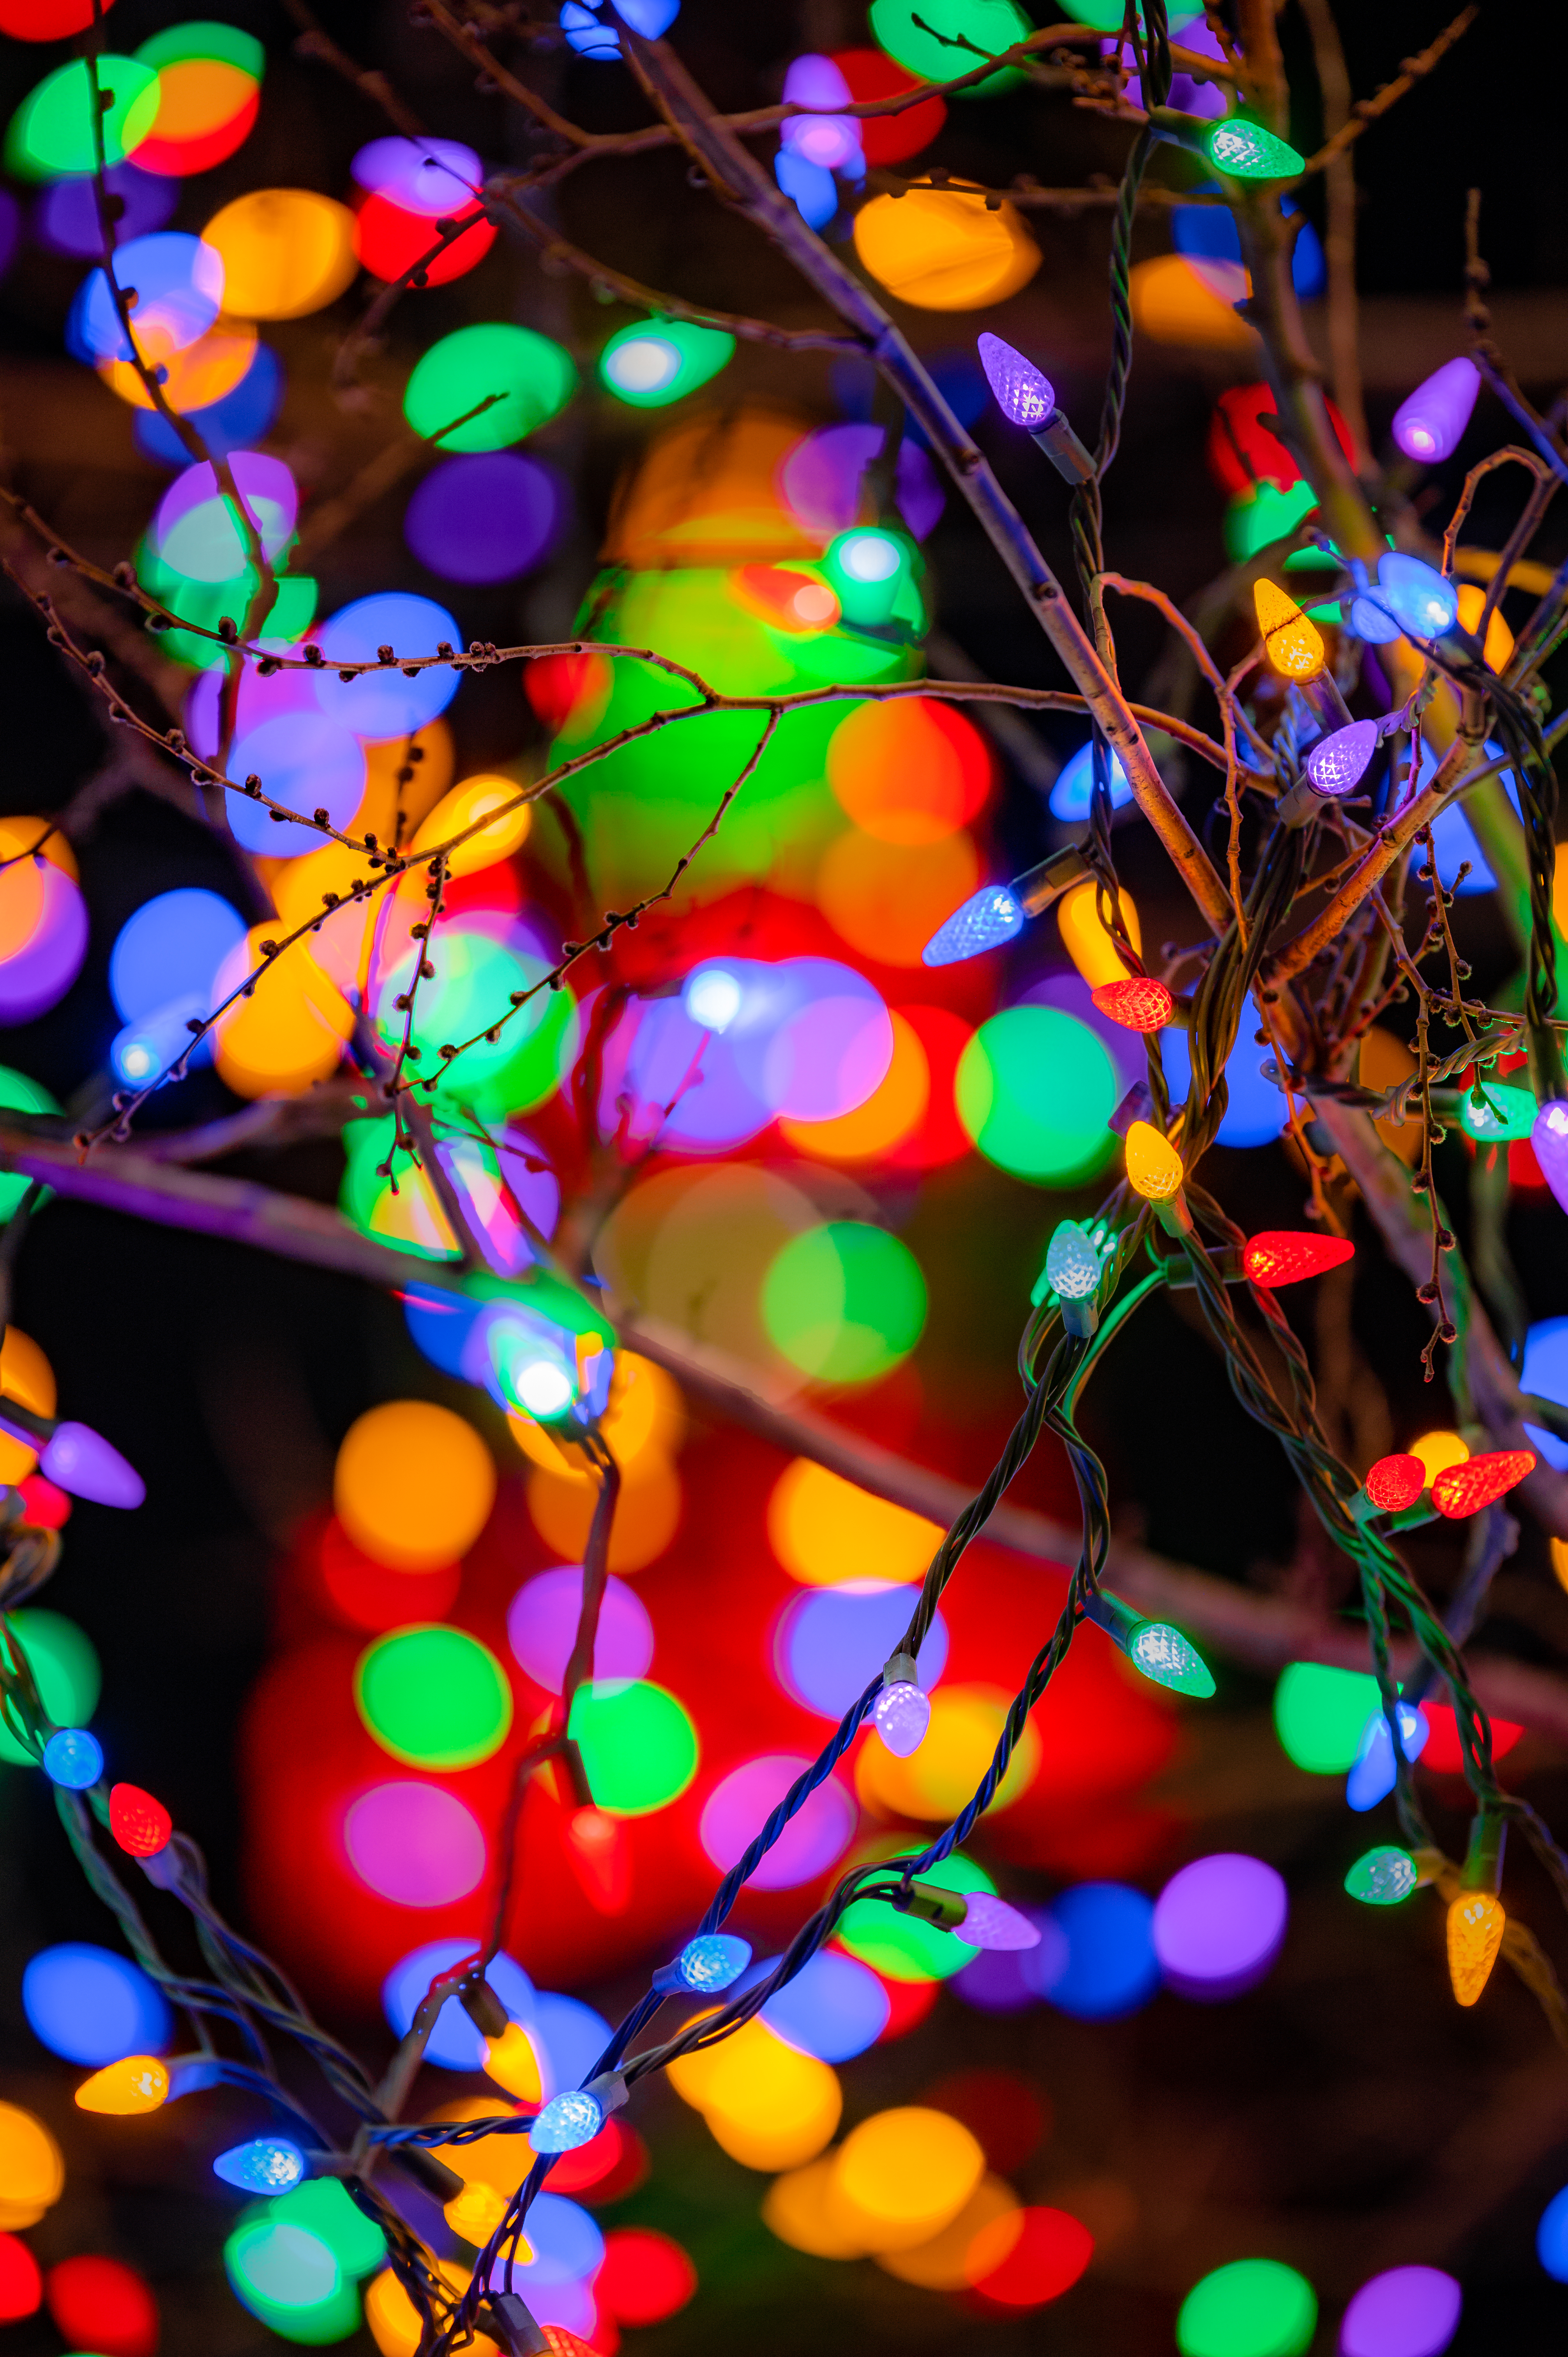 festive, lights, multicolored, garland New Lock Screen Backgrounds